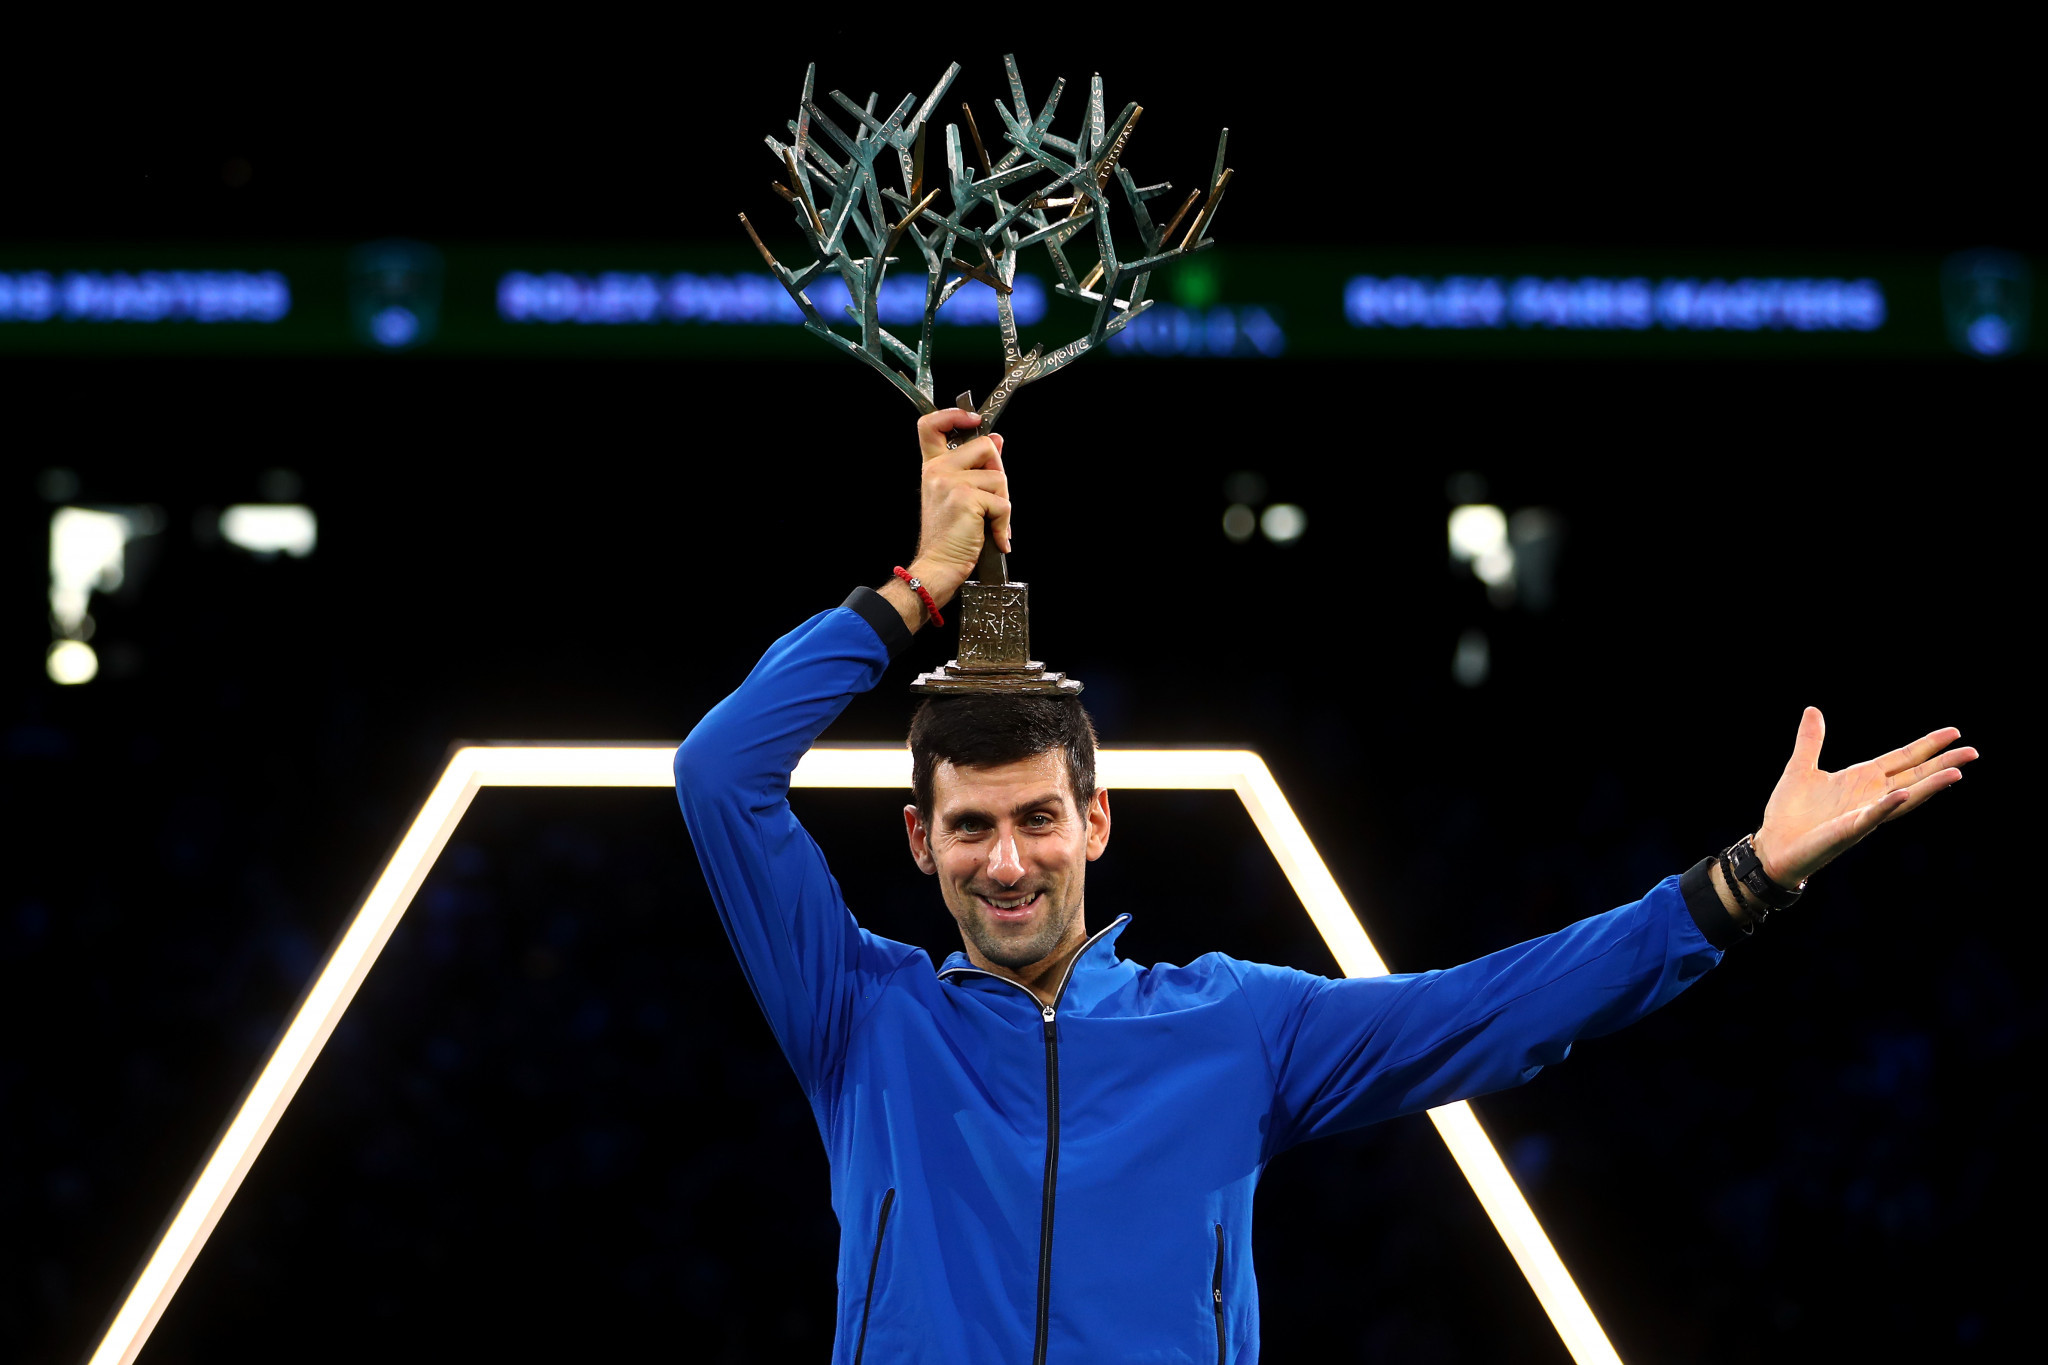 For the seventh time in his career, 'Nole' gathered at the Paris Masters 1000. © Getty Images